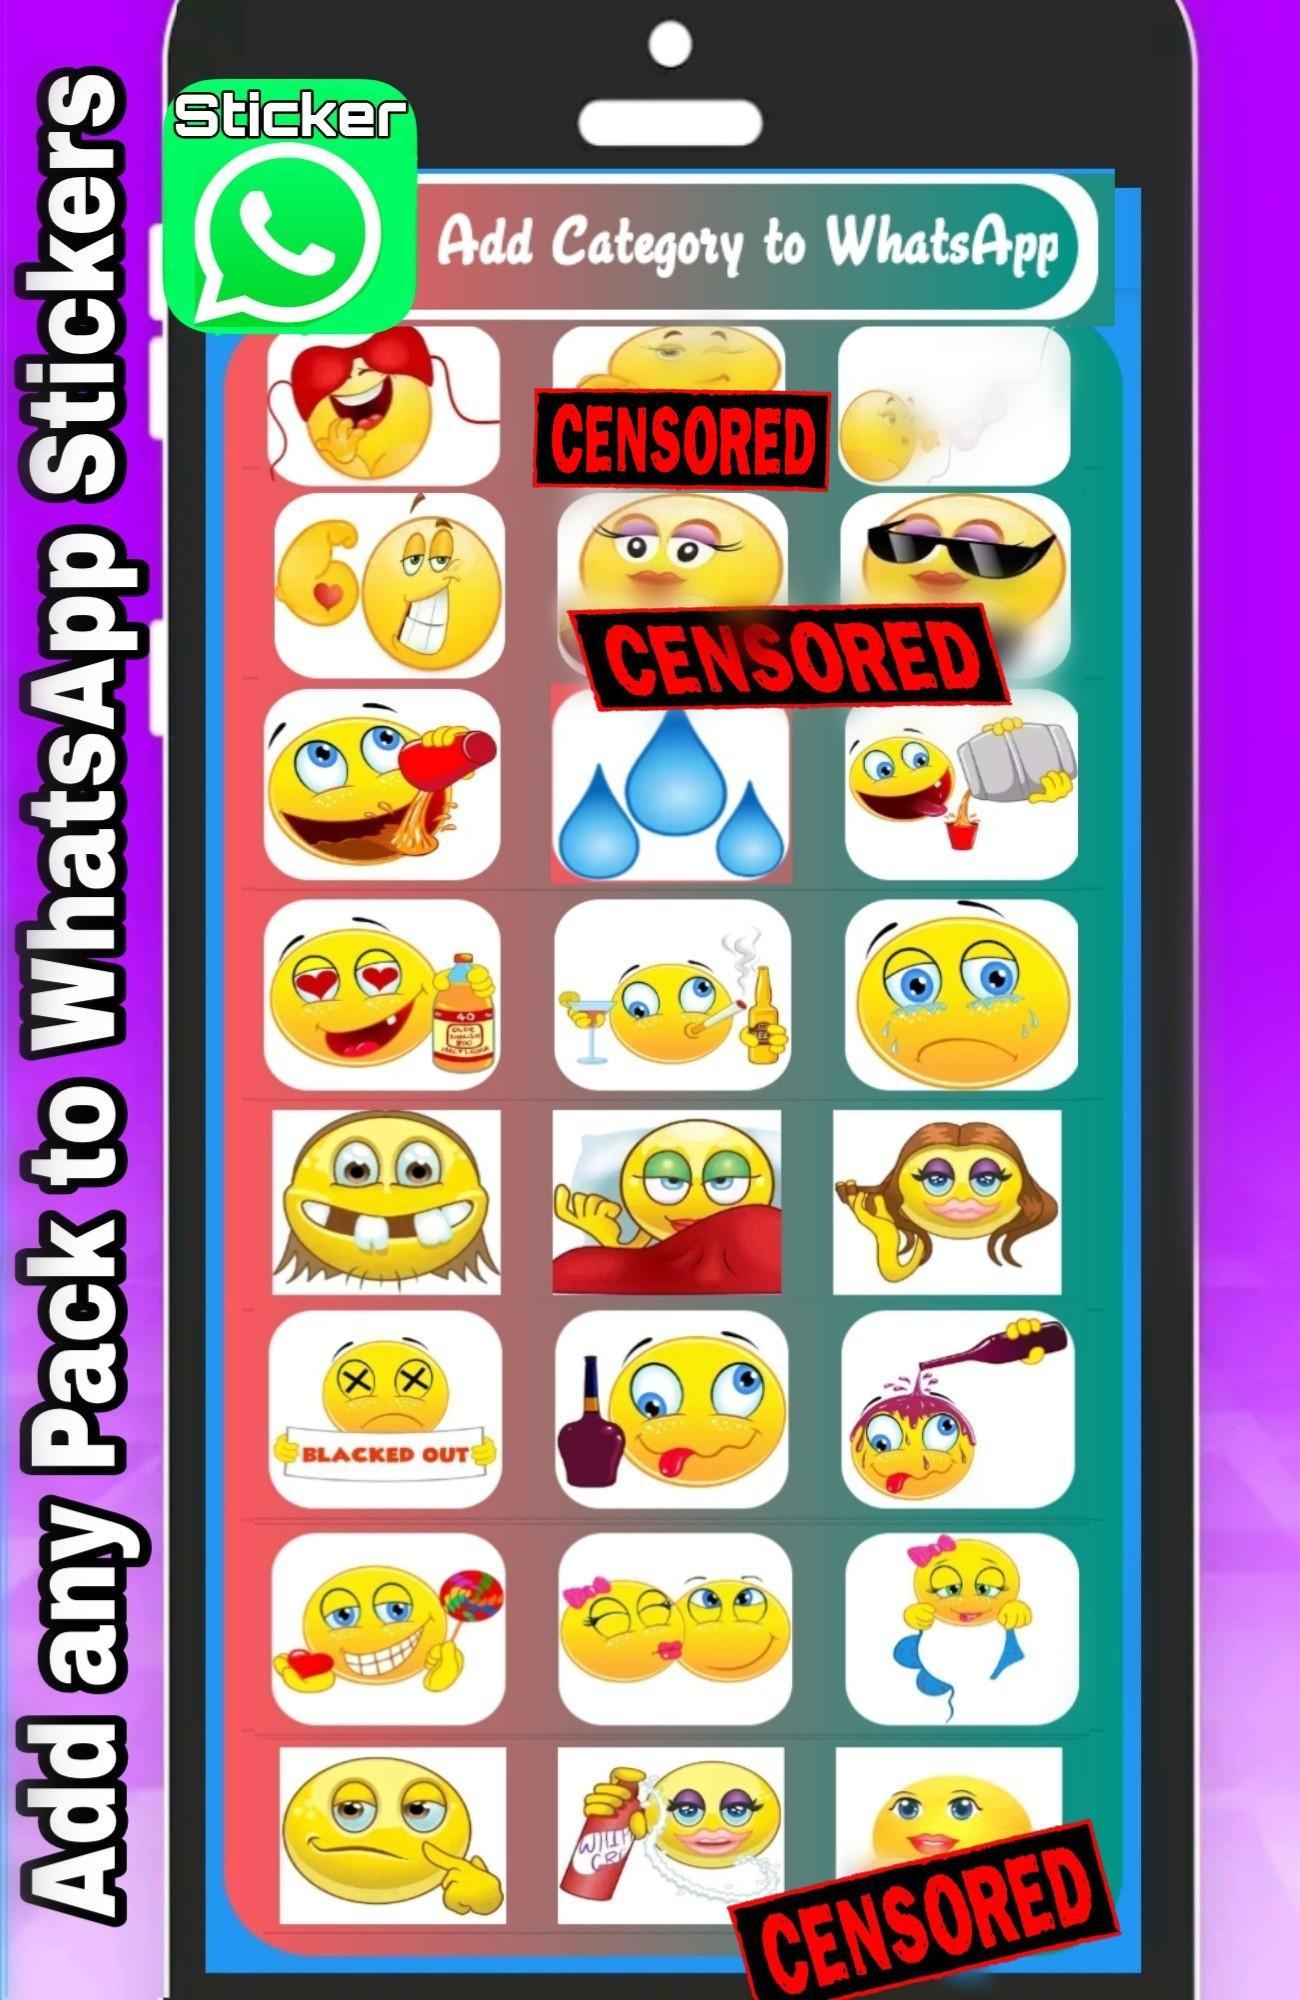 Naughty Emoji KeyBoard Adult Sticker for WhatsApp for Android - APK Download